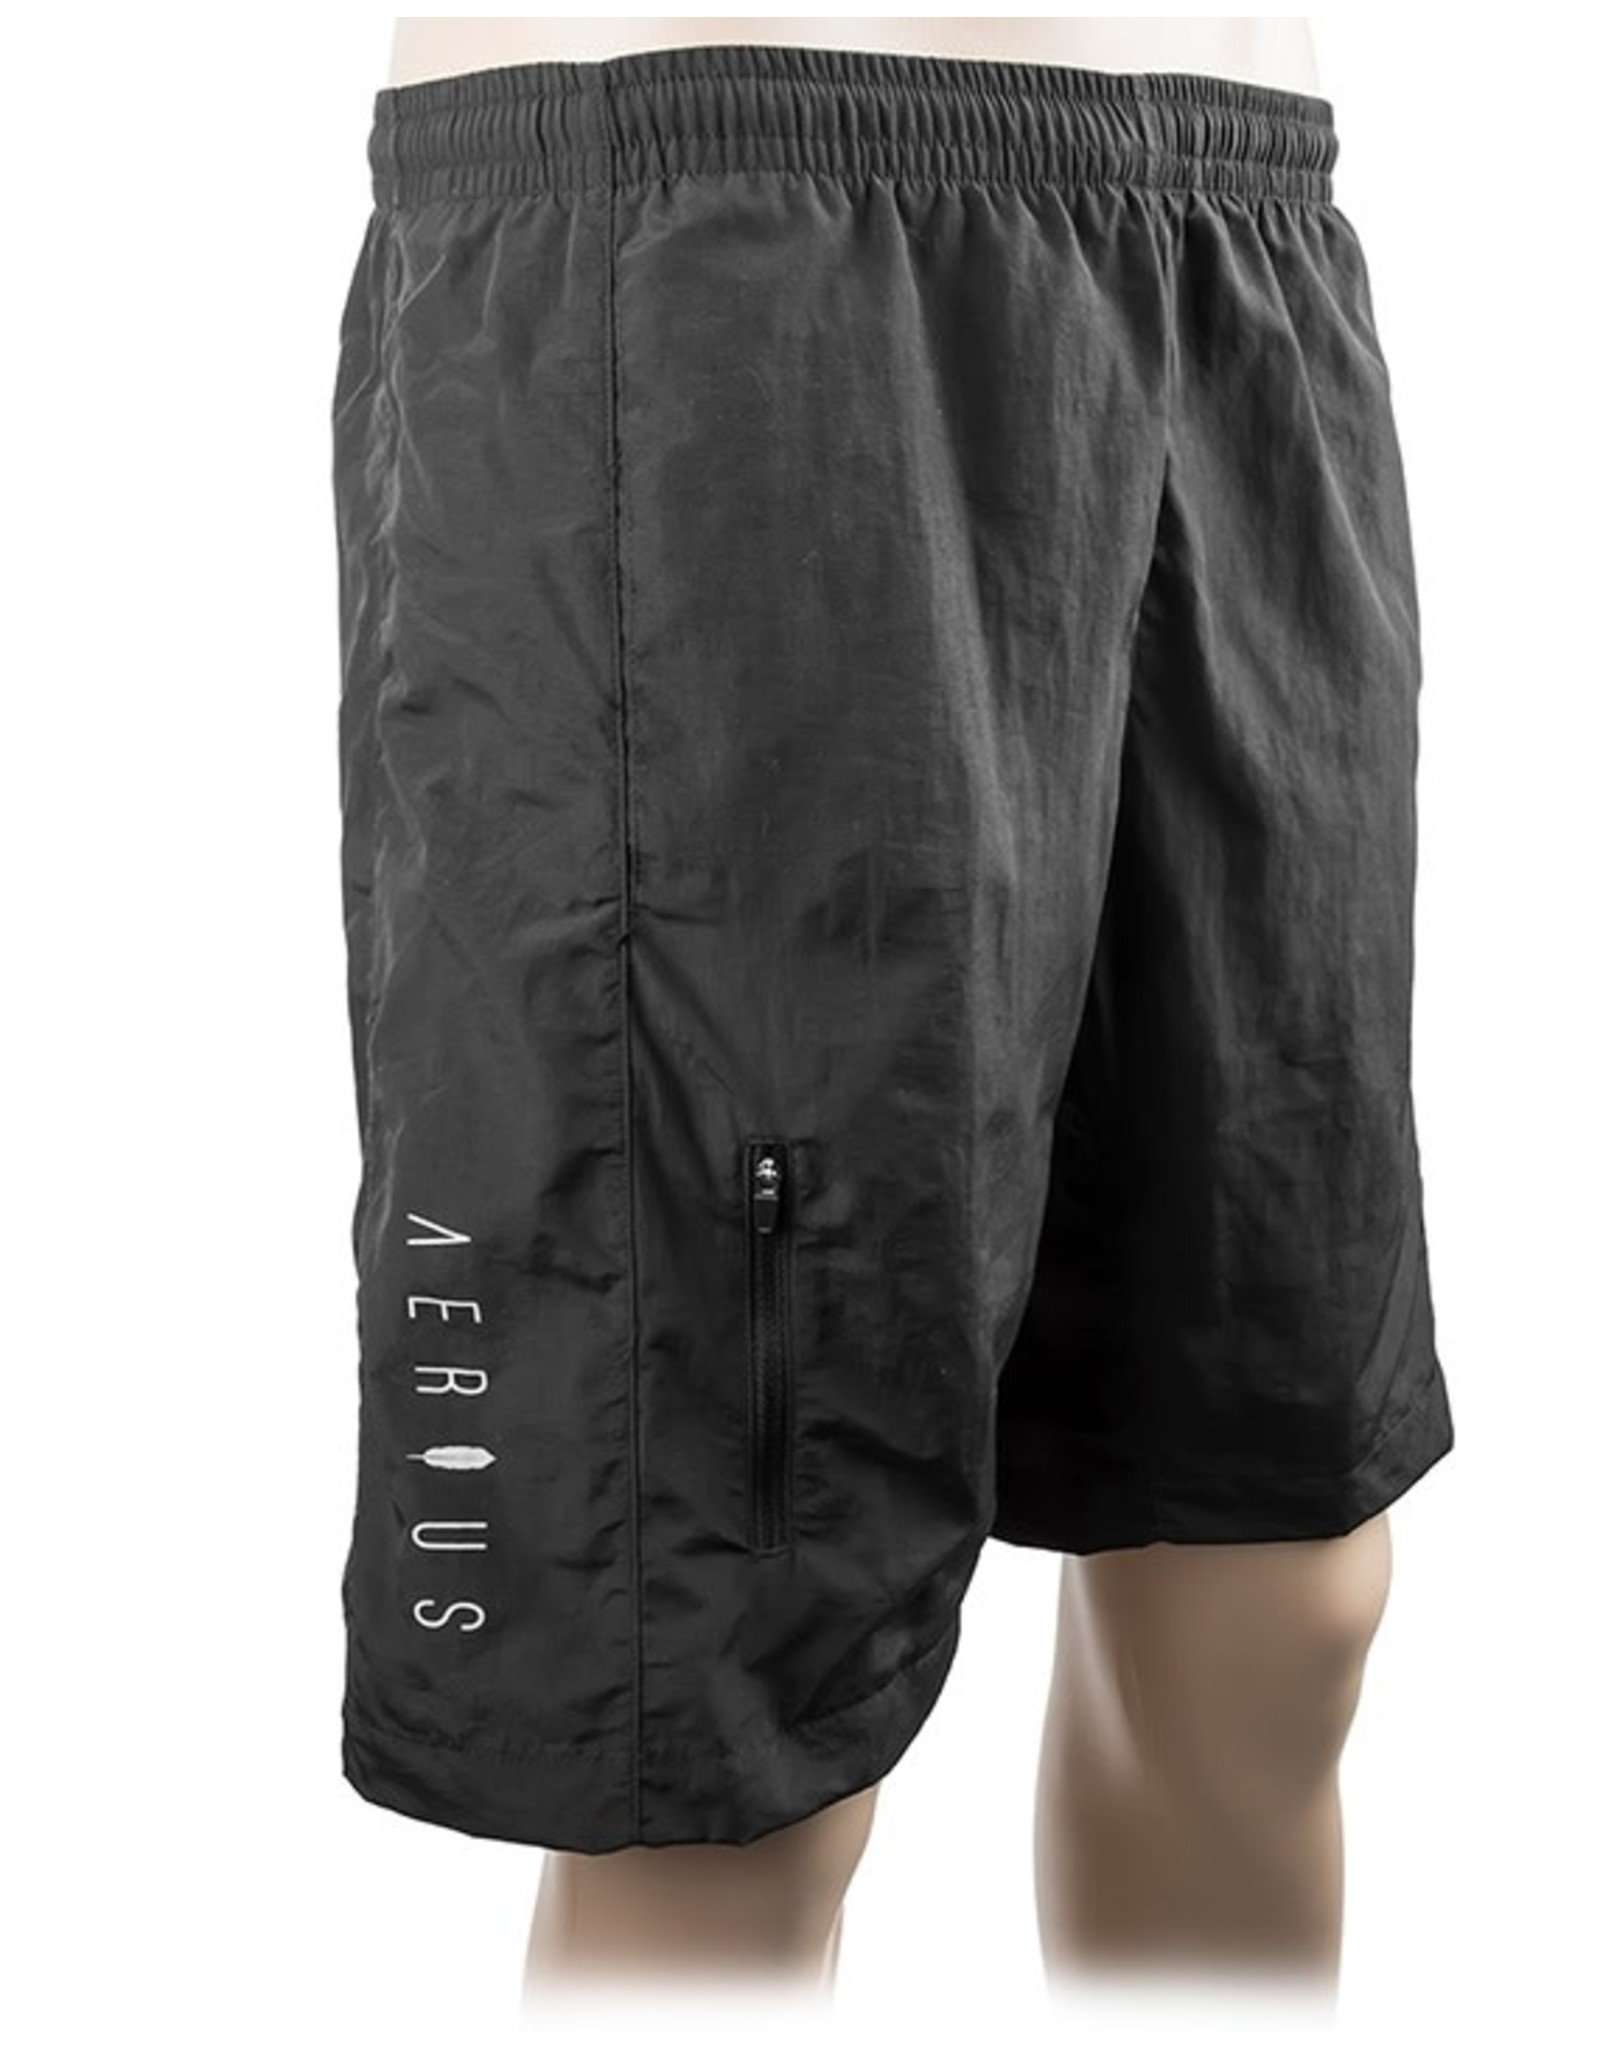 CLOTHING LOOSE-FIT MTB SHORTS AERIUS  XLG